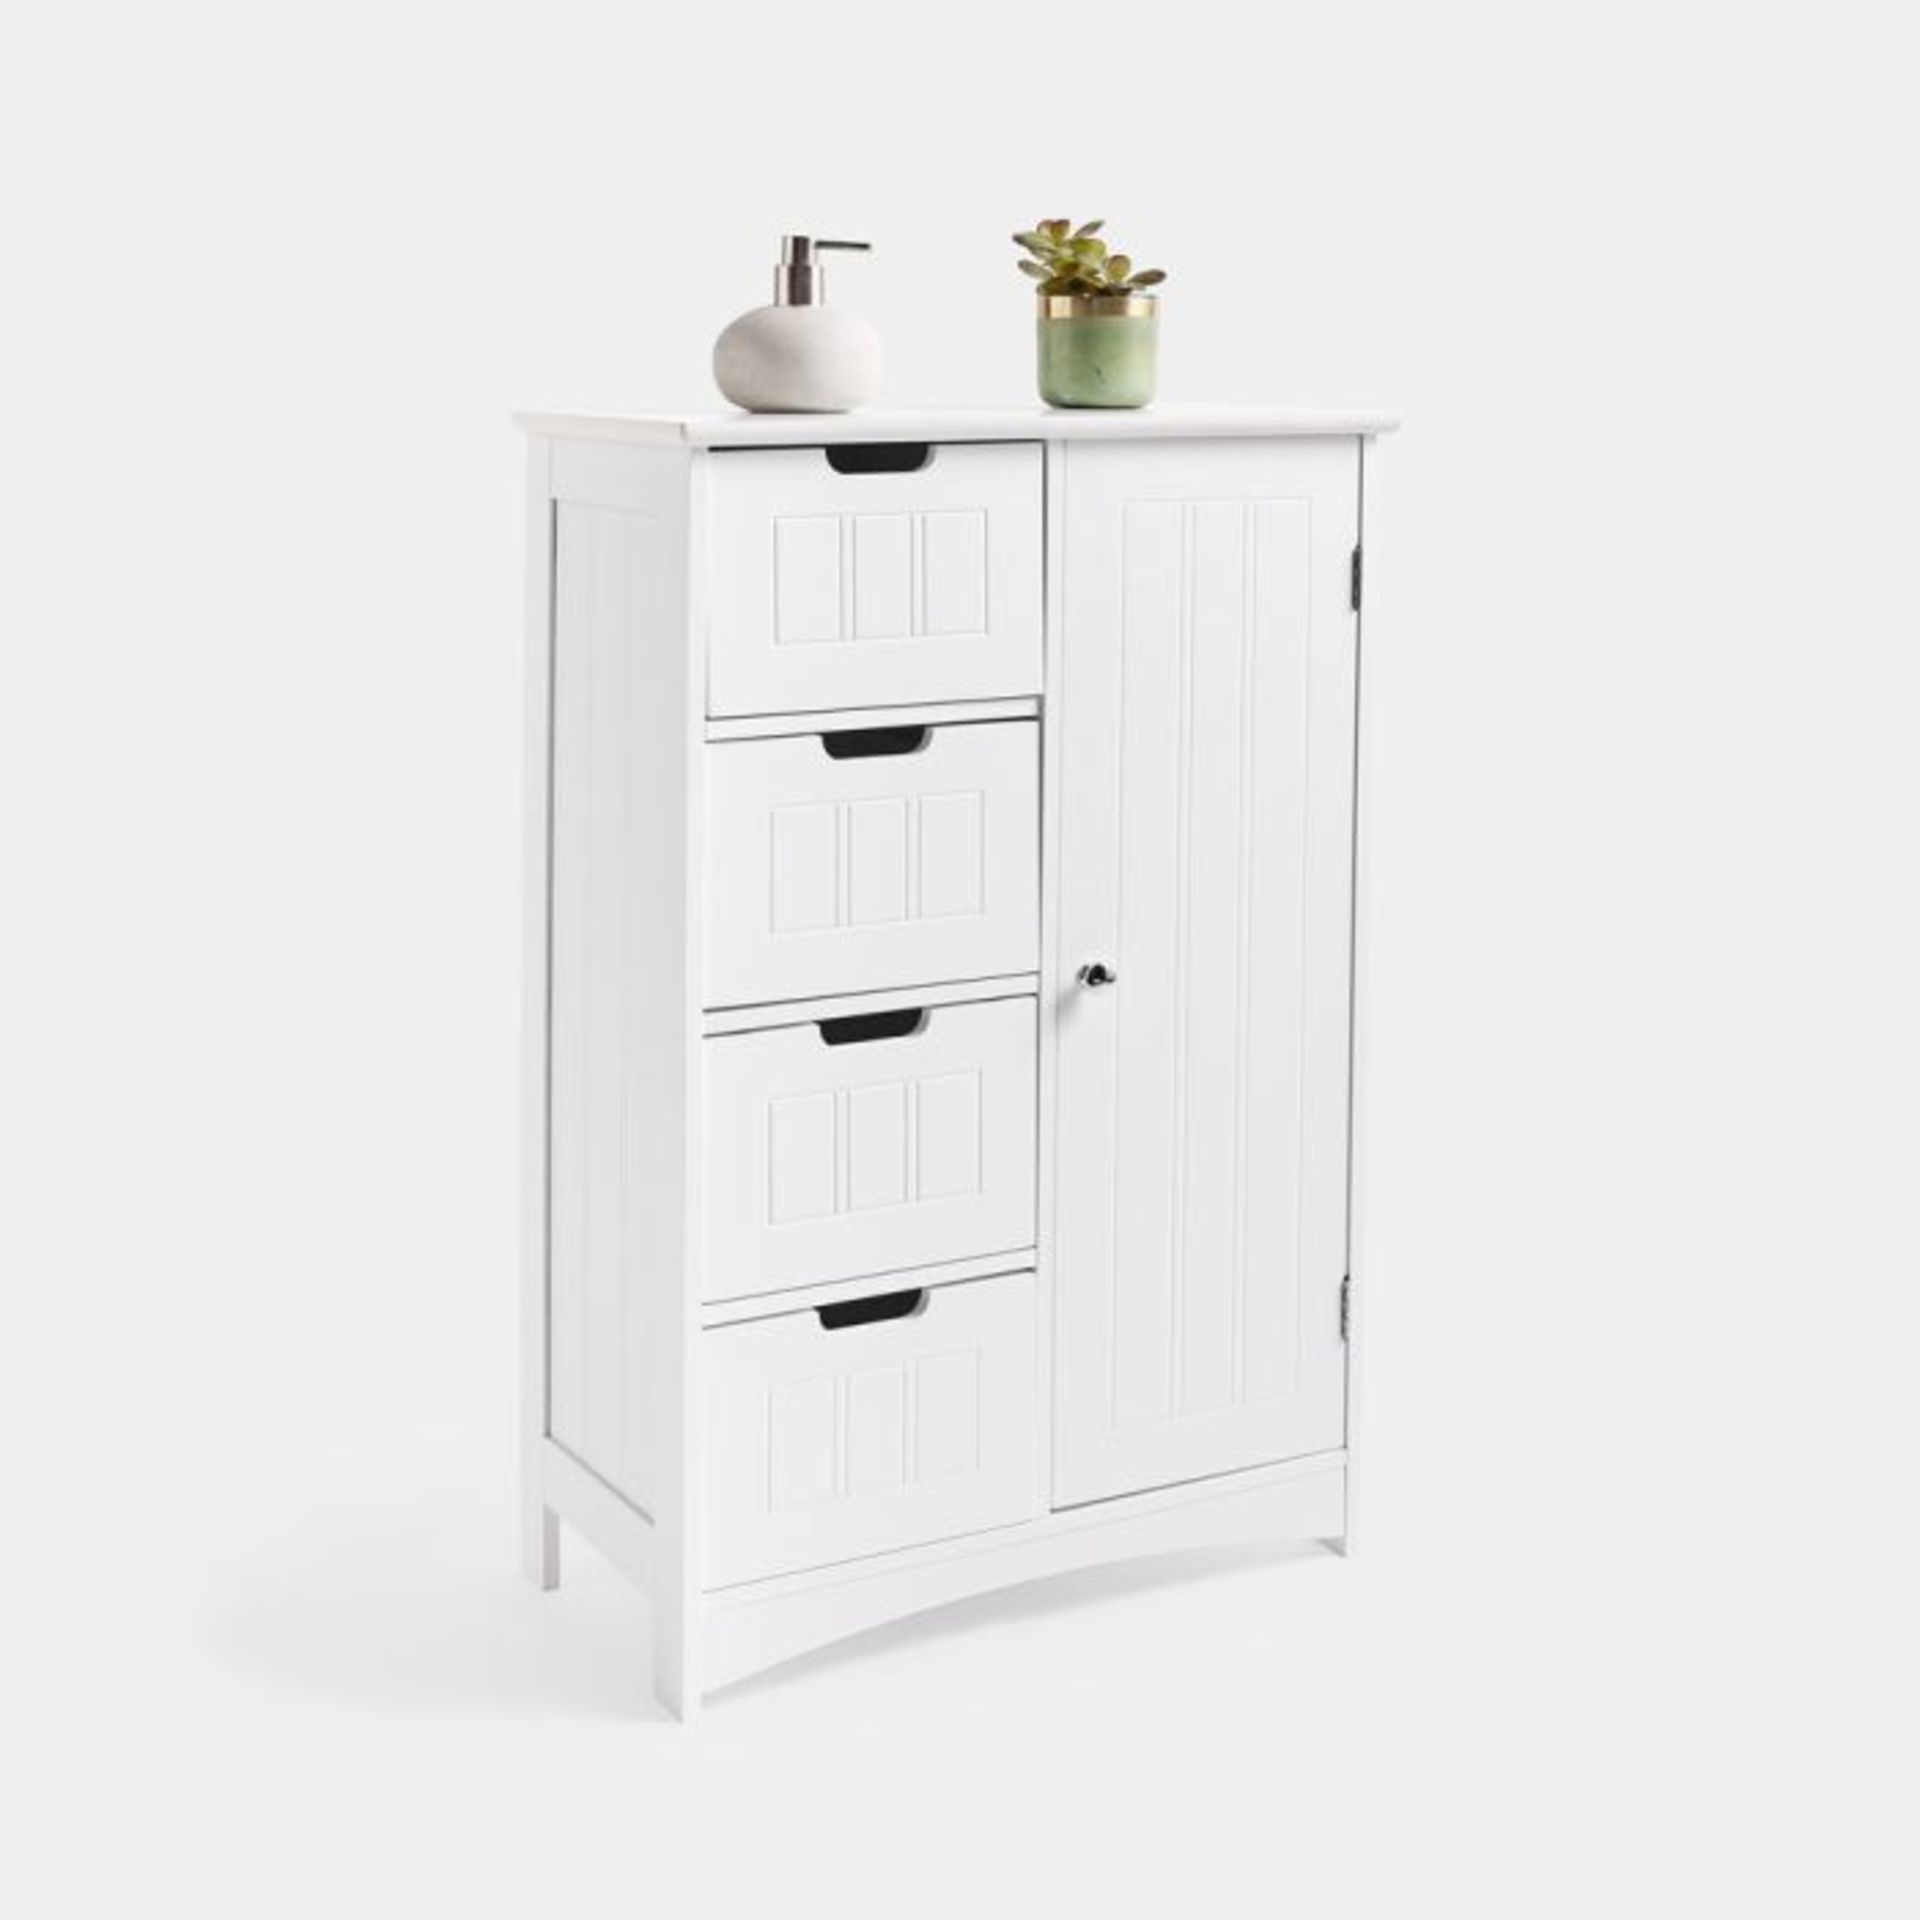 Holbrook White Bathroom Cabinet. - ER36. Featuring a Shaker Style design add a little Shaker Style